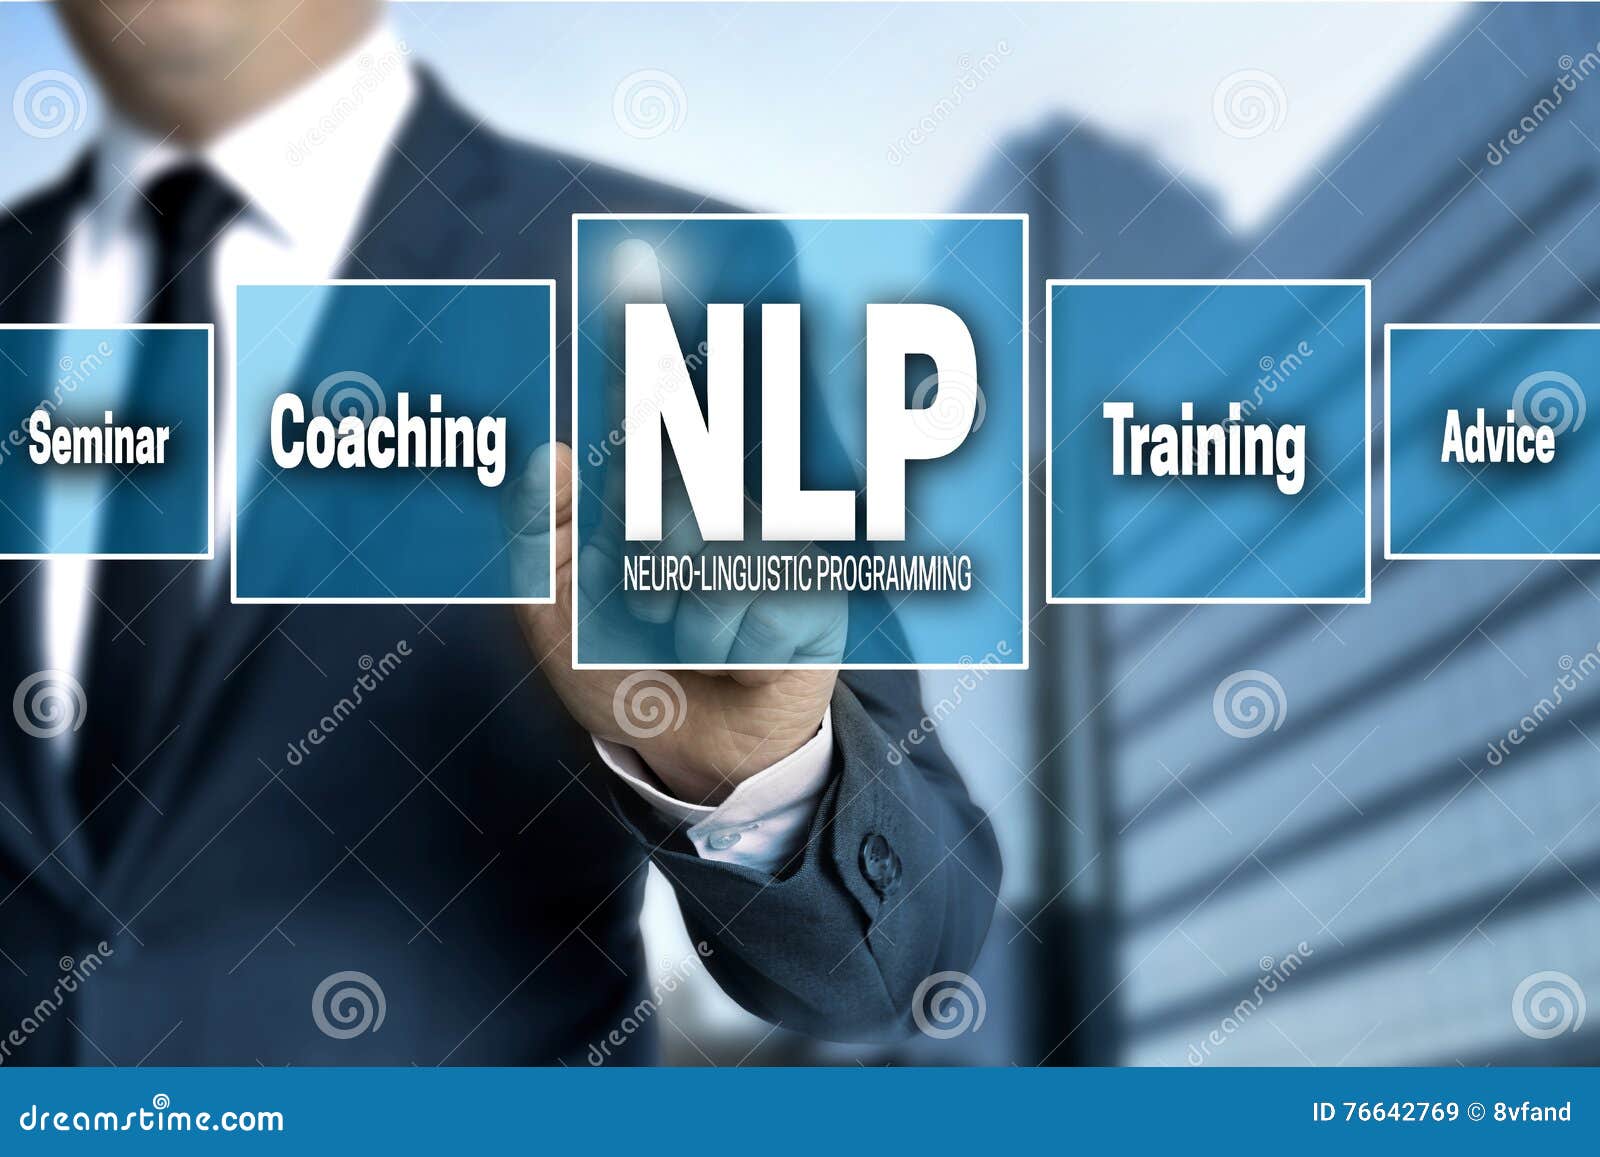 nlp touchscreen is operated by businessman